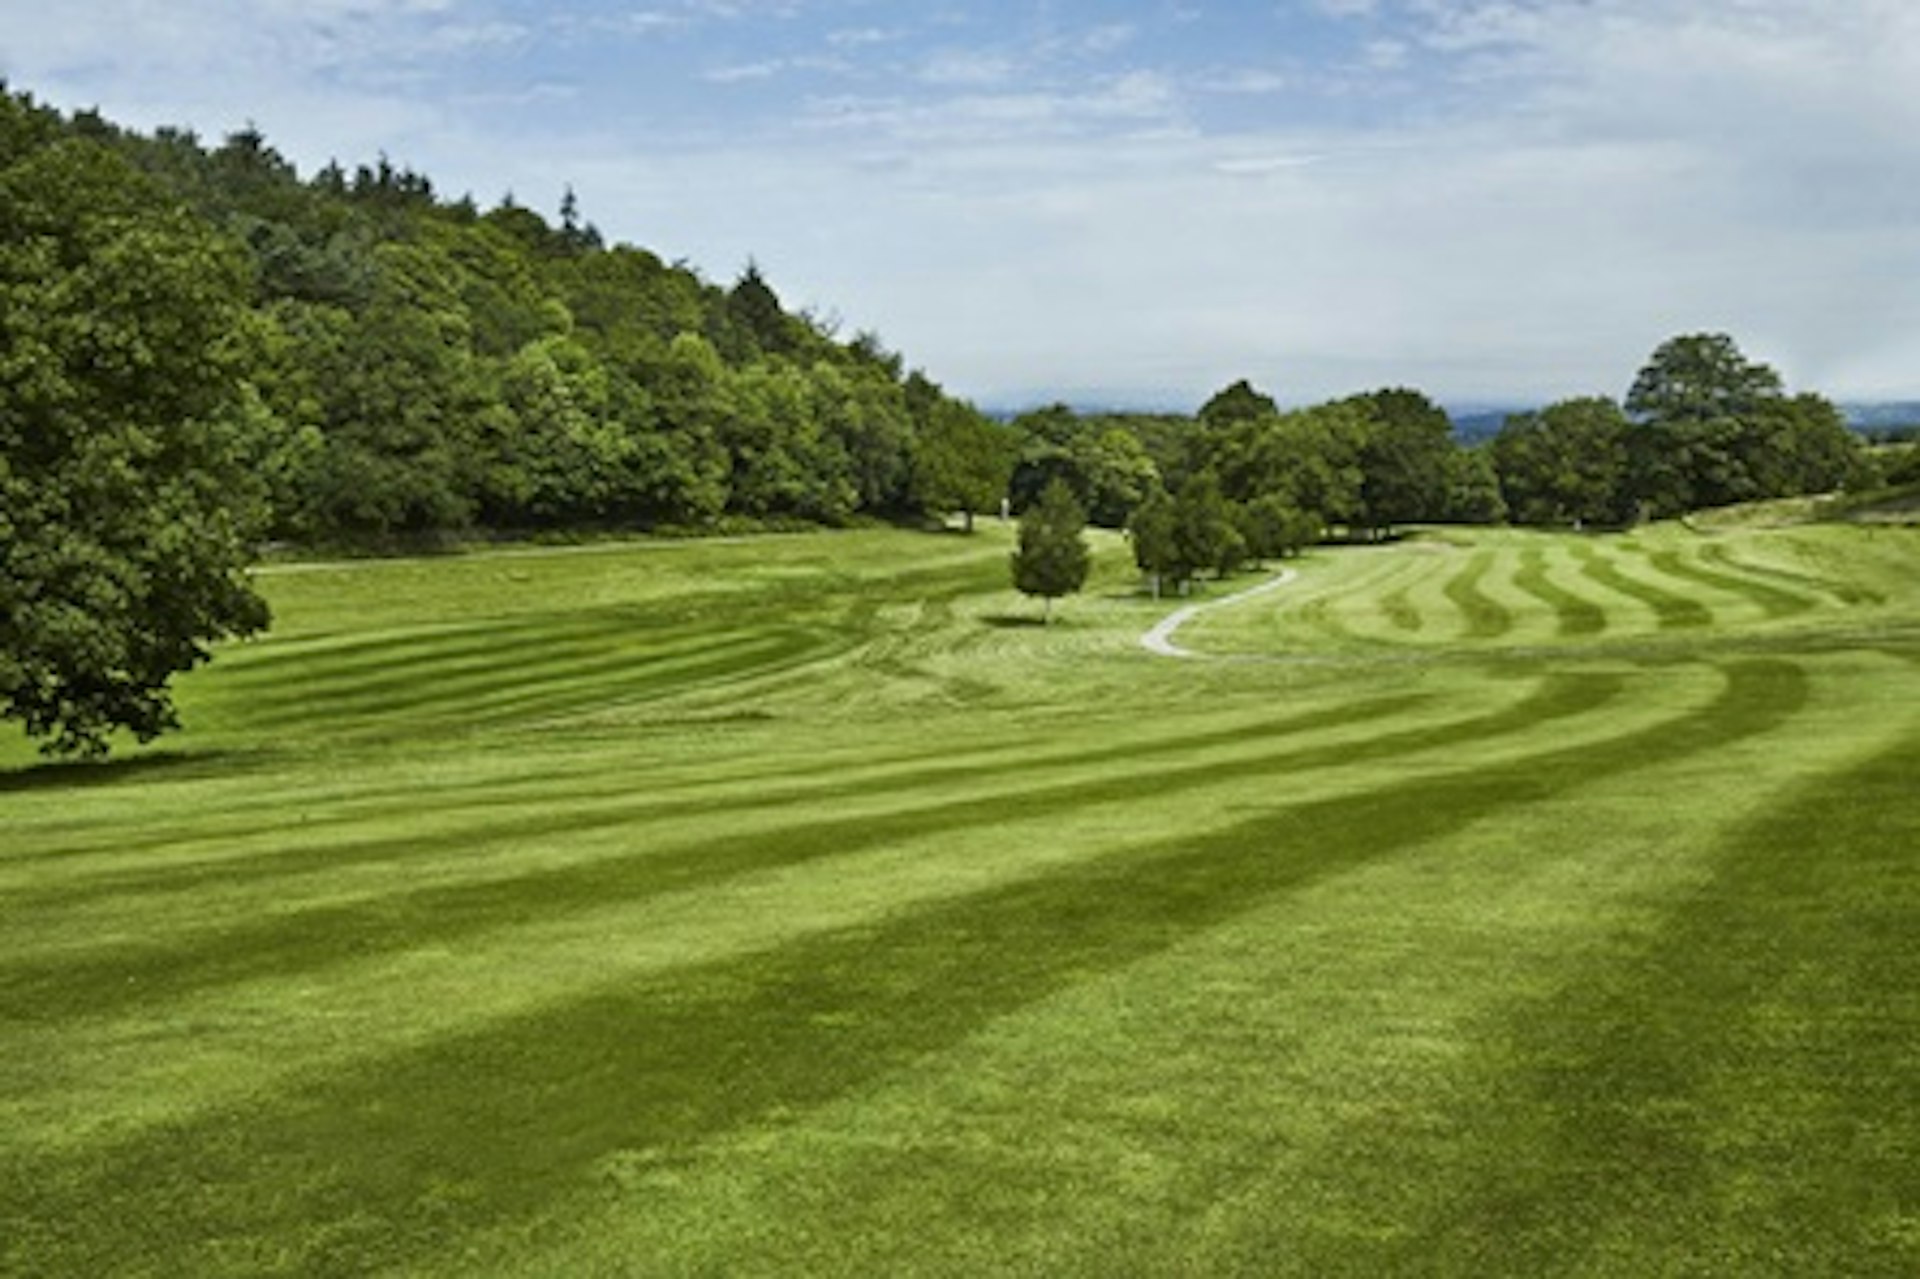 18 Hole Round of Golf for Two at The Shrigley Hall Hotel & Spa 4